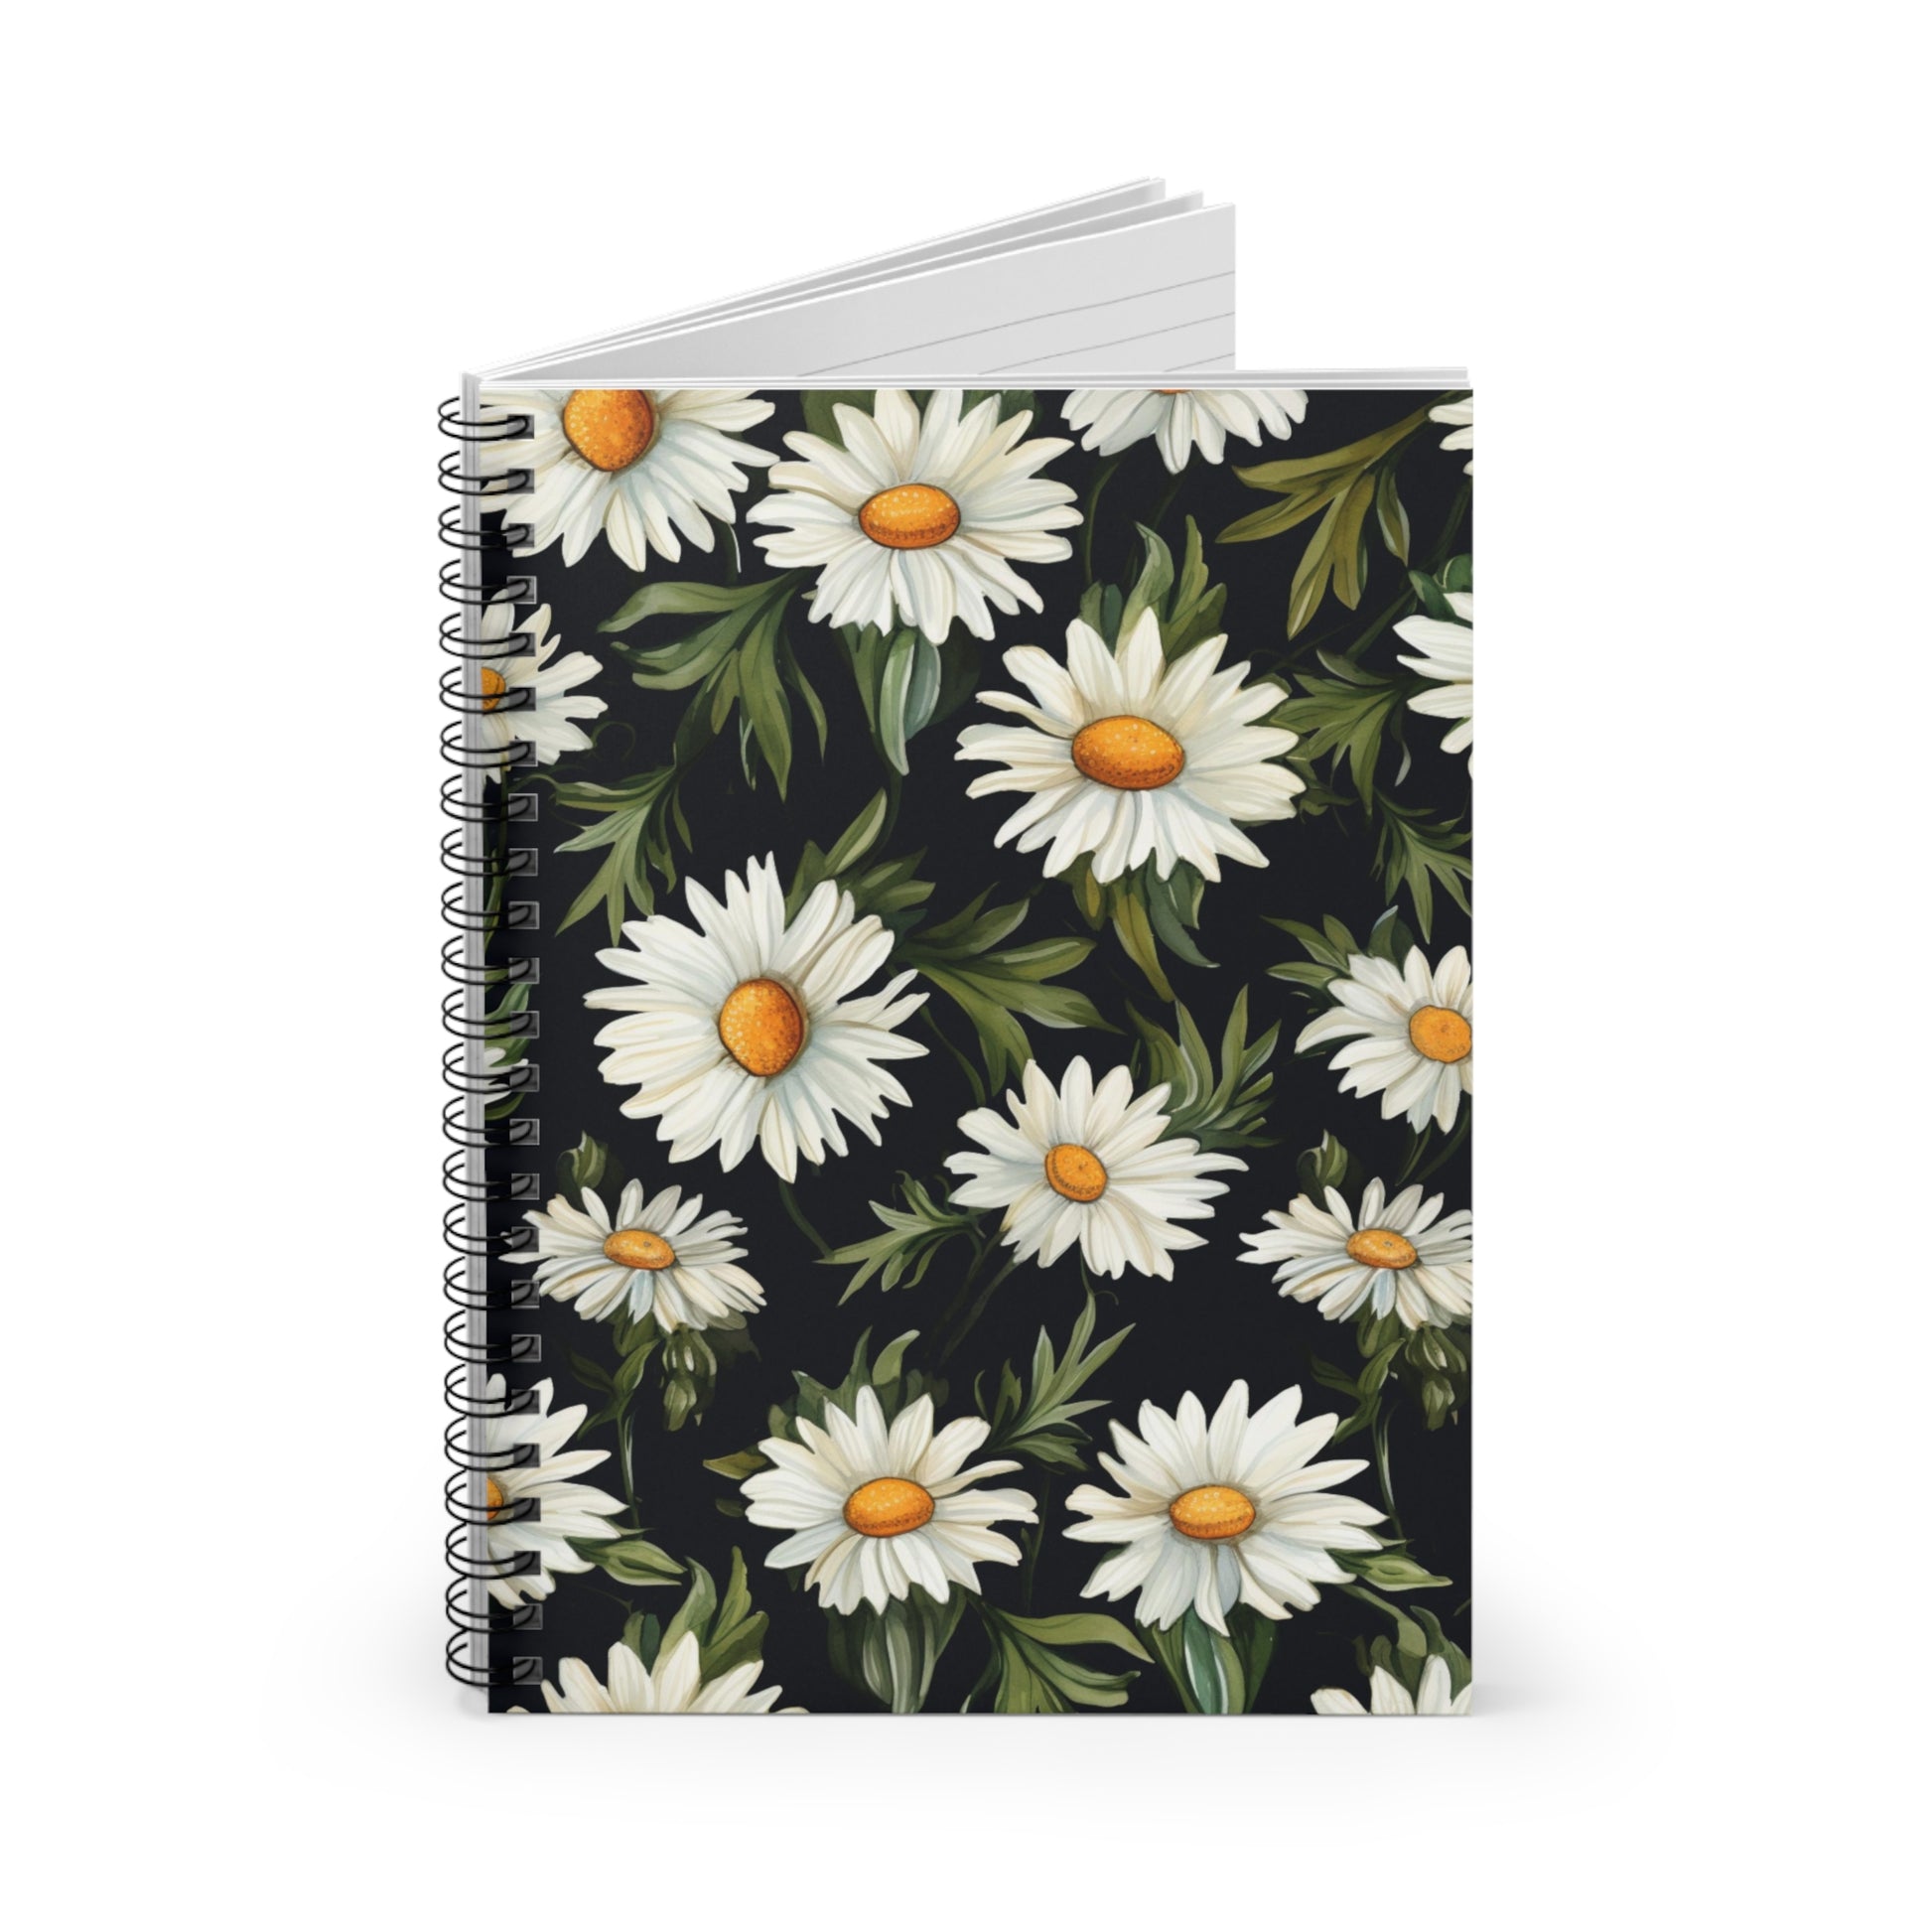 Daisies Spiral Notebook, Daisy Flowers Floral Travel Design Small Journal Notepad Ruled Line Book Paper Pad Work Aesthetic Gift Starcove Fashion